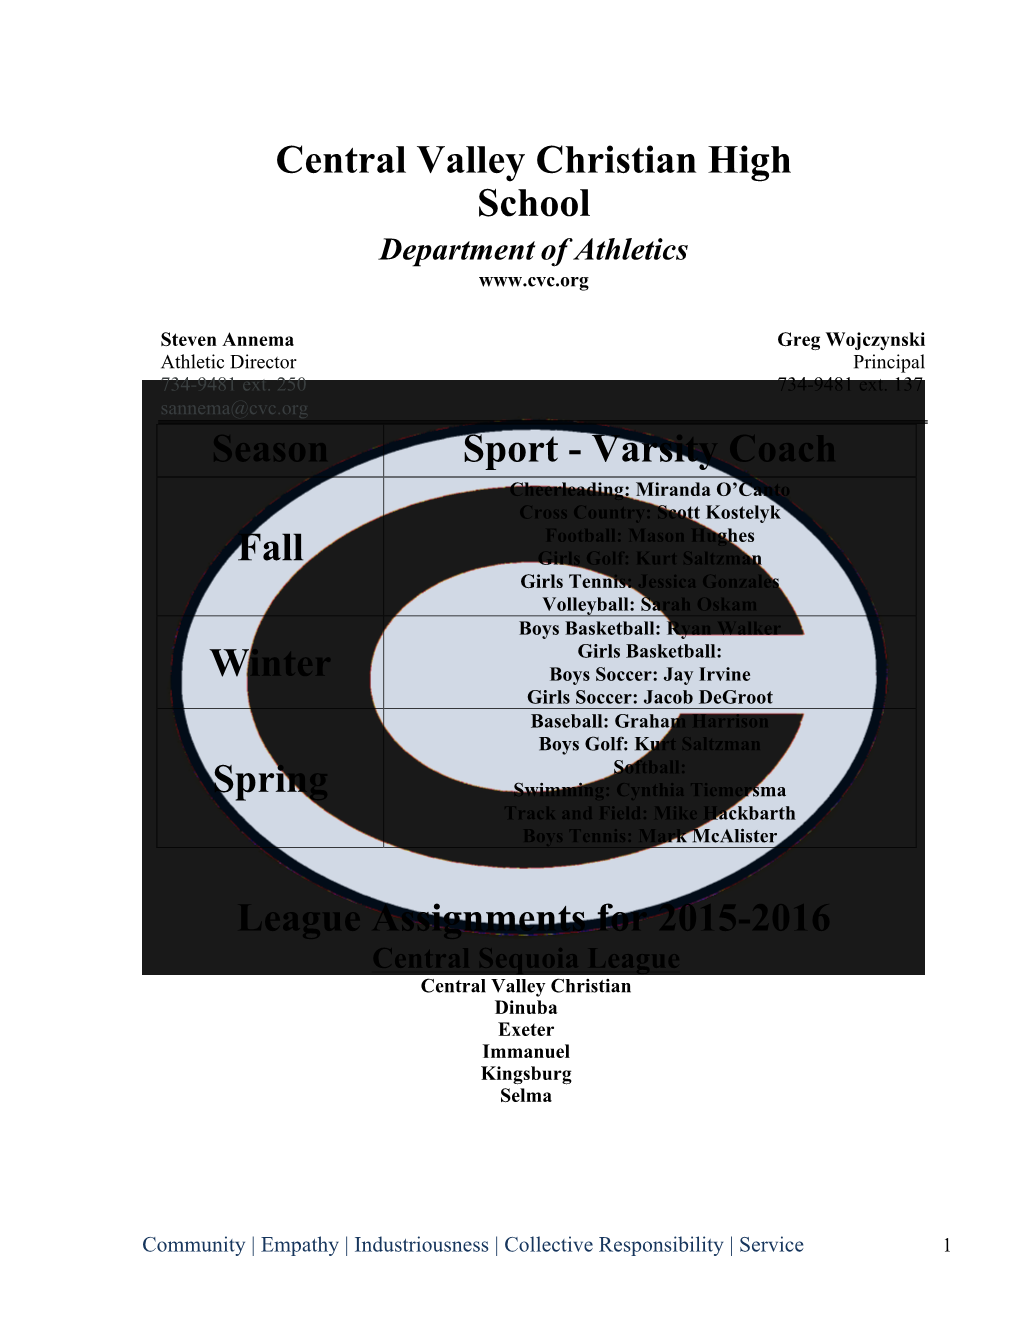 Central Valley Christian High School League Assignments for 2015-2016